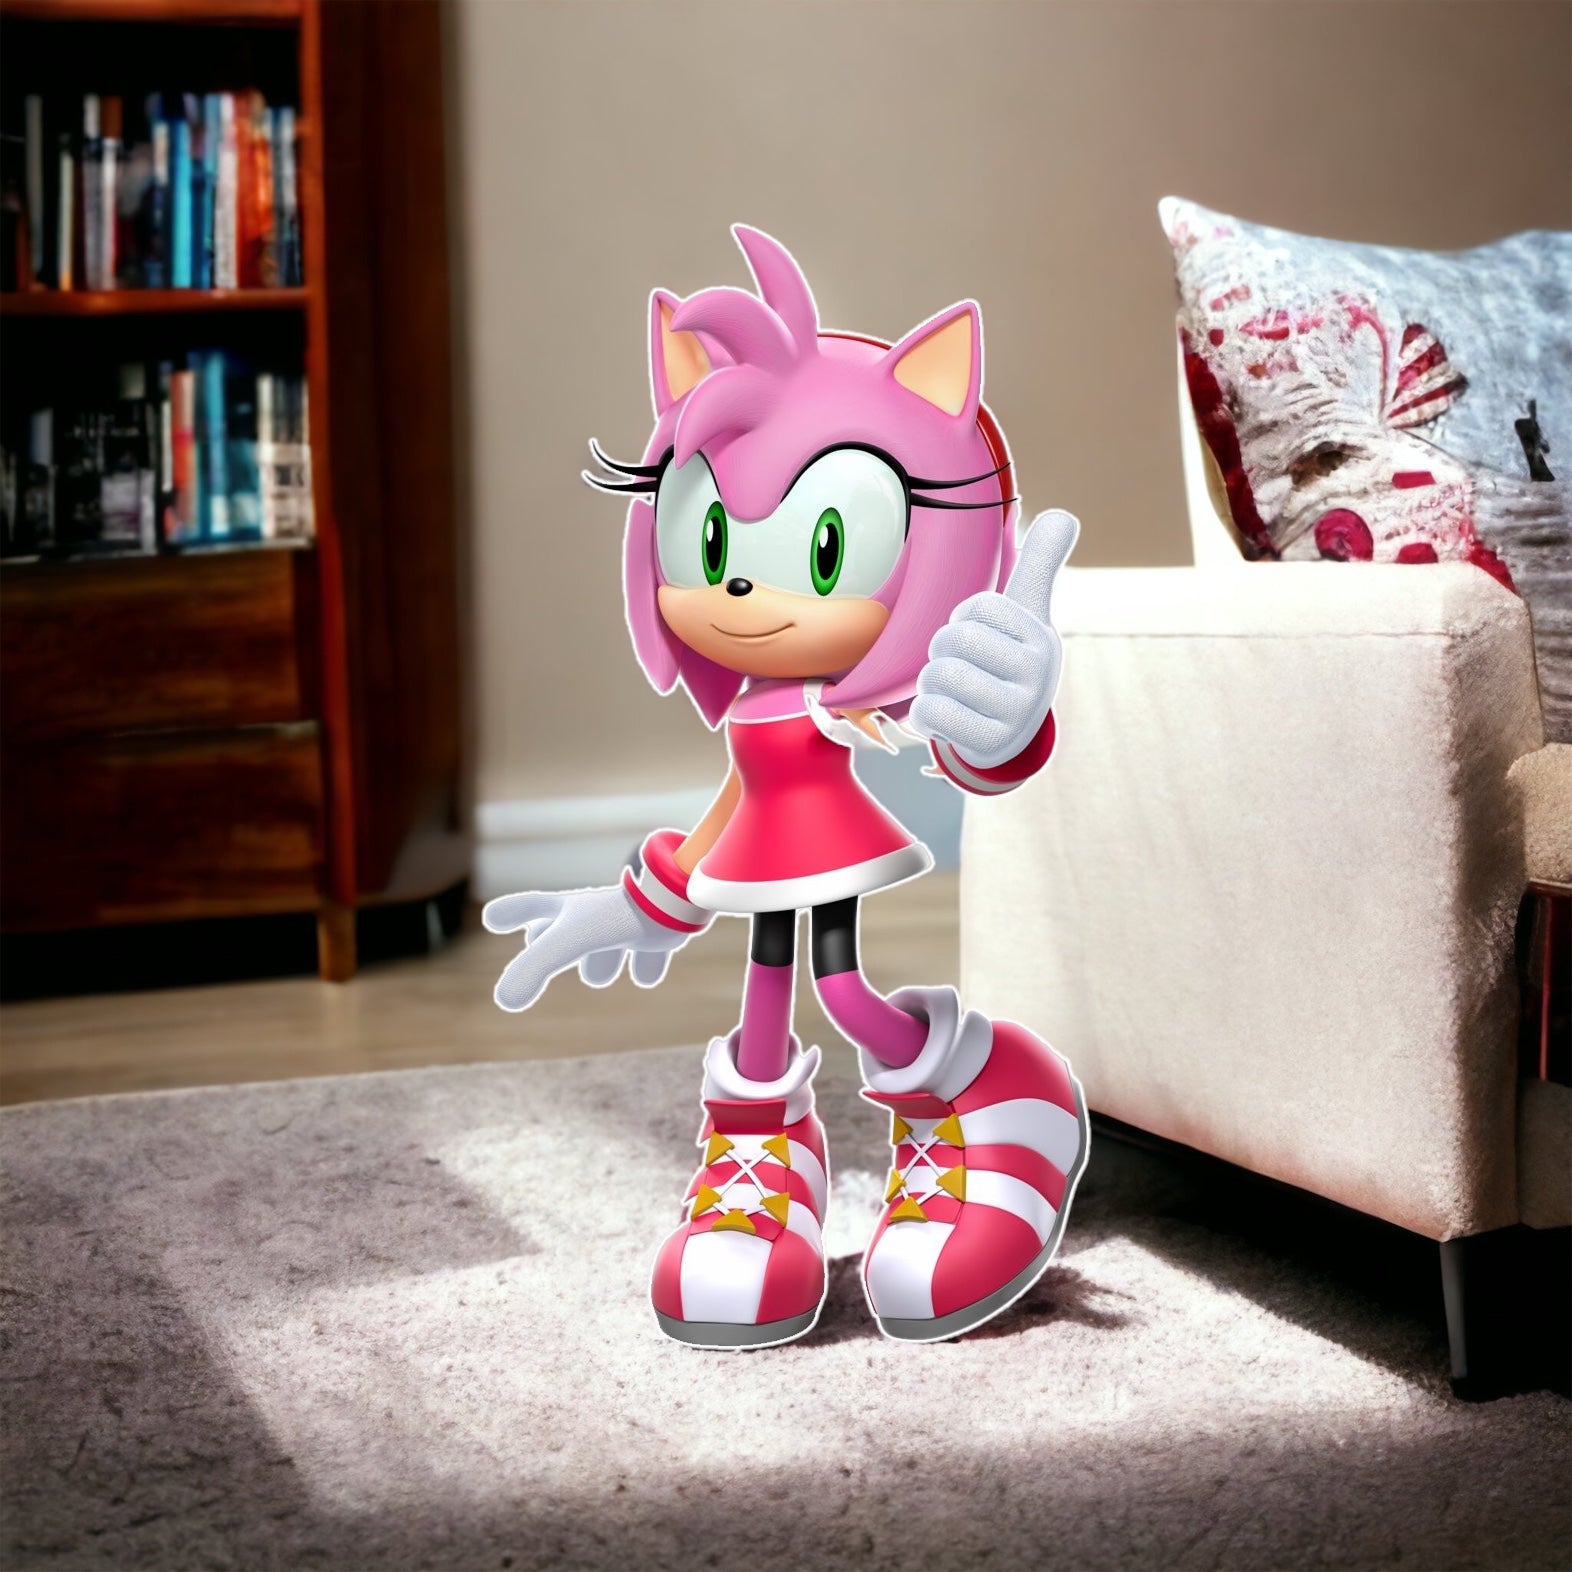 Sonic Amy Rose Cutout/Birthday Sonic Theme/Girl Birthday Party/Birthday standee, centerpieces, backdrop, cake topper, Prop and party decor – DN Decorlance By: DarNil Dynasty LLC